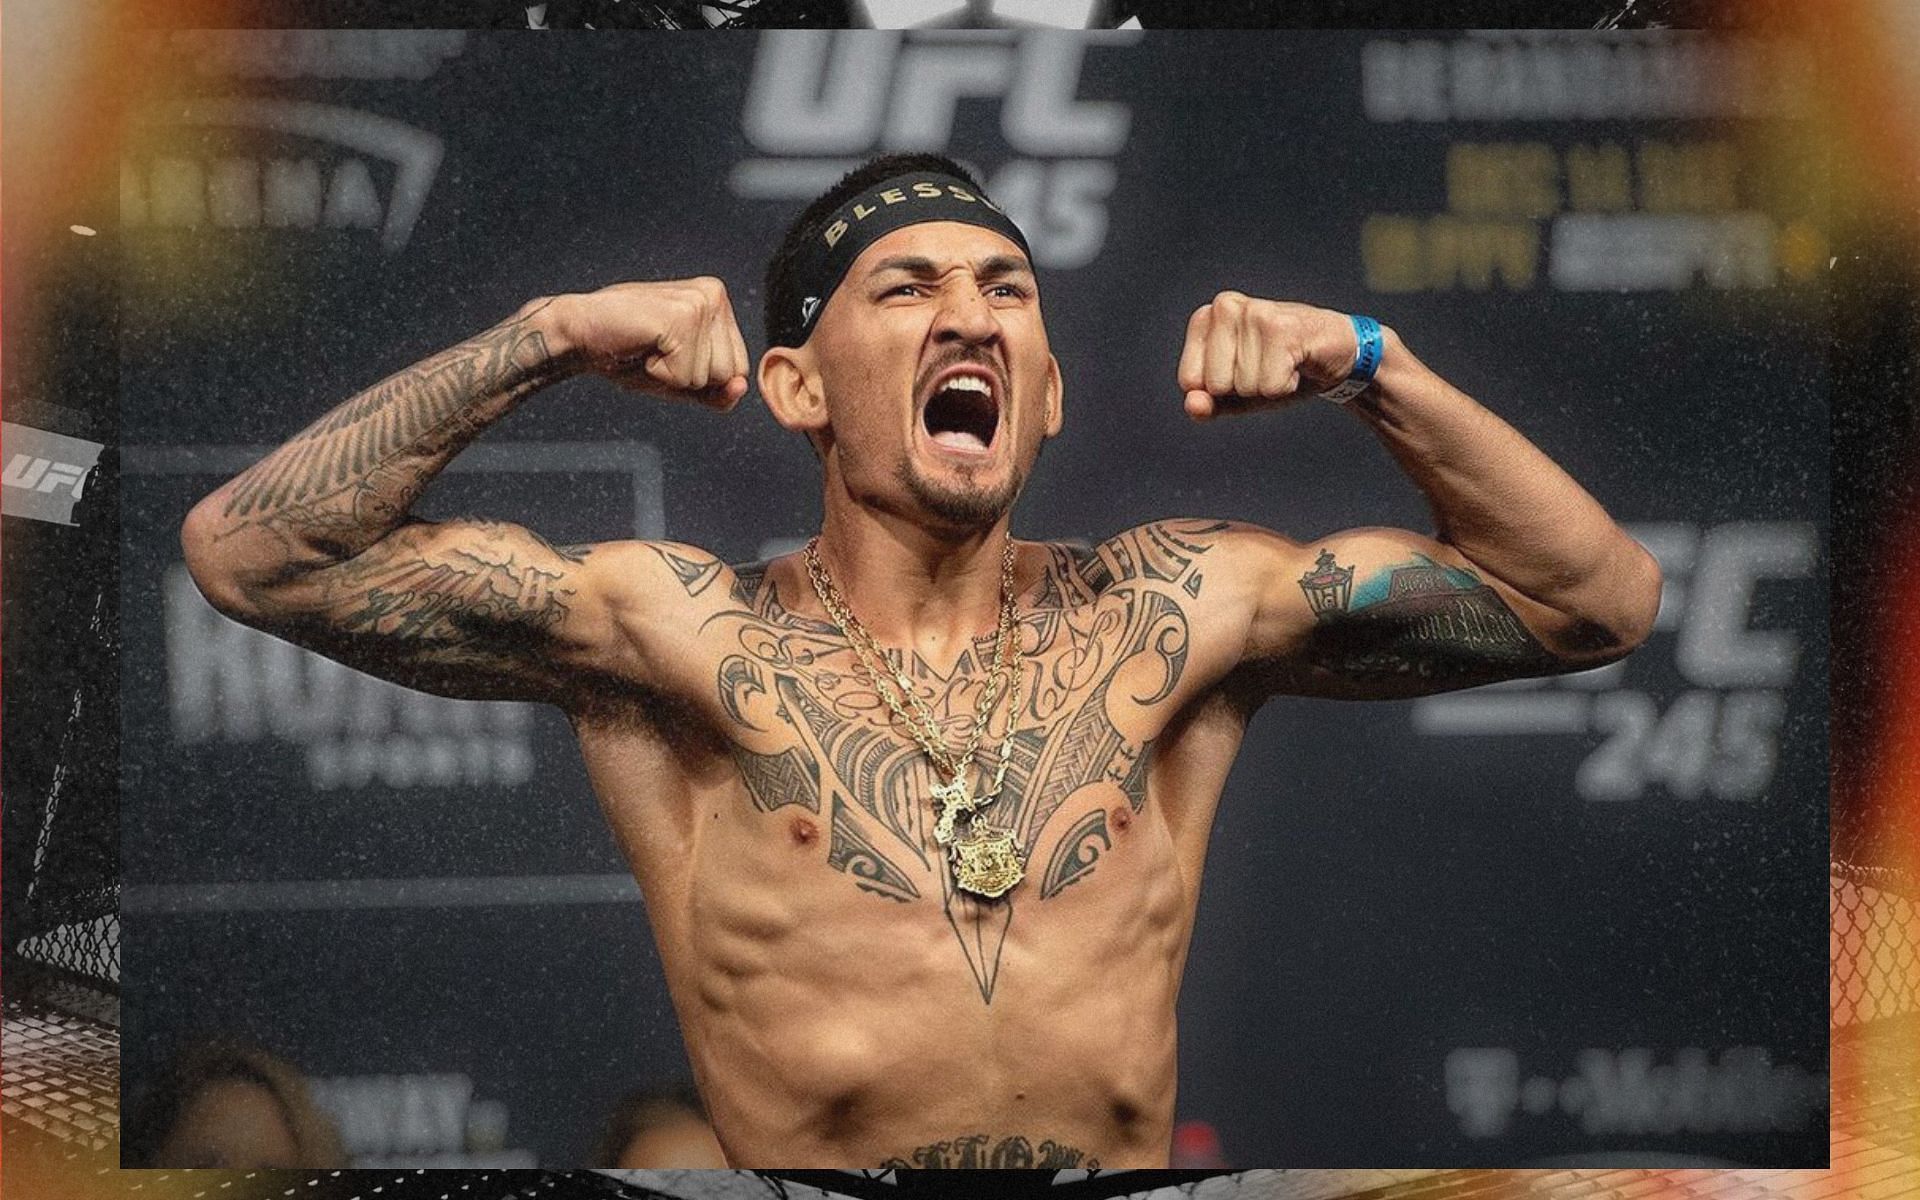 Max Holloway opened up on his withdrawal from UFC 226. [Image courtesy: @blessedmma on Instagram]